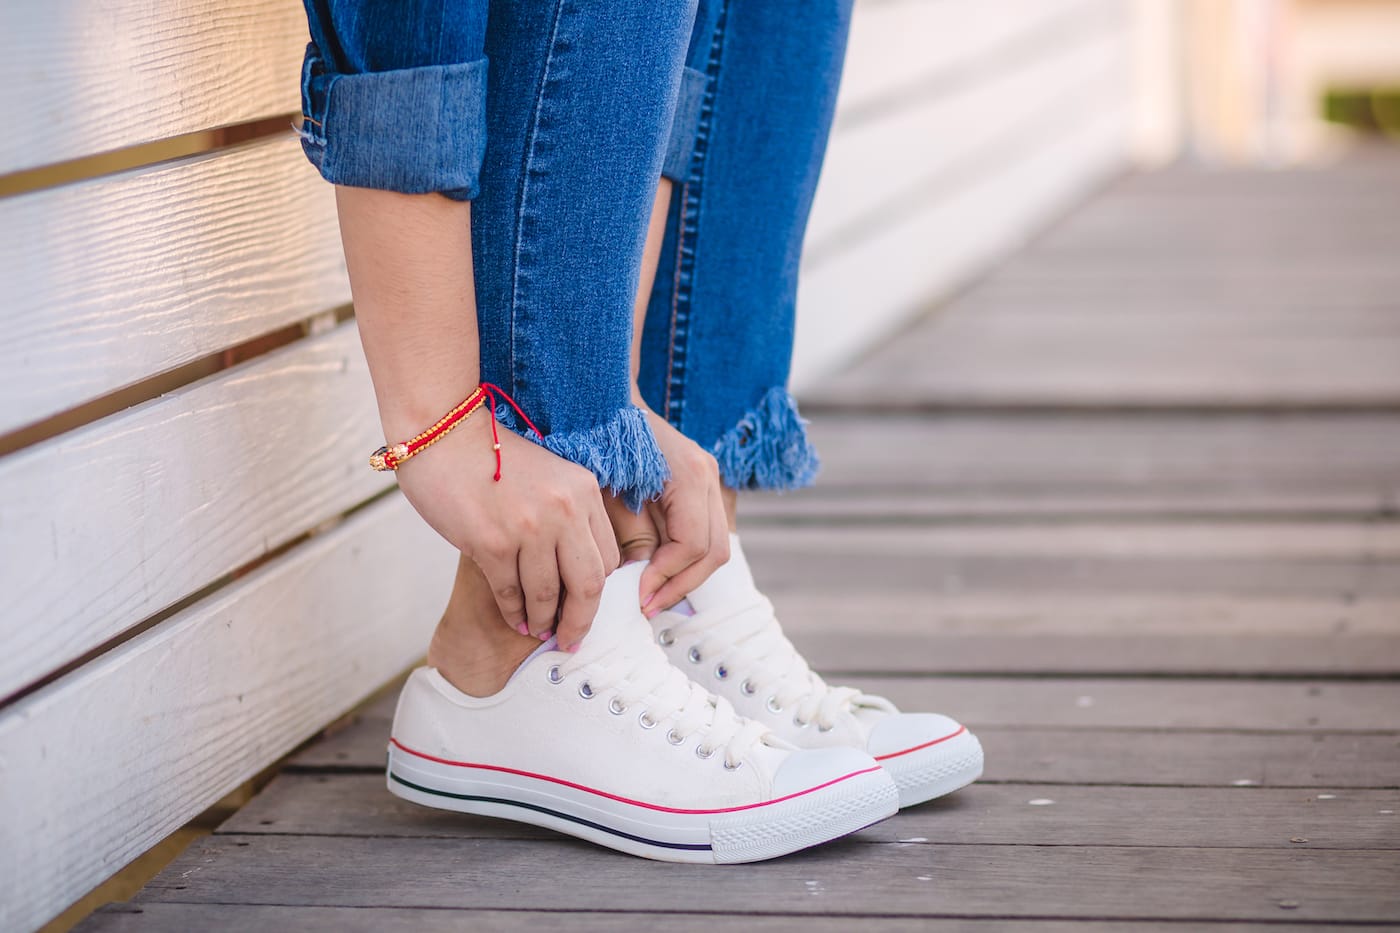 Making This Mistake With Your Sneakers Is the Quickest Way to Get a Fungus